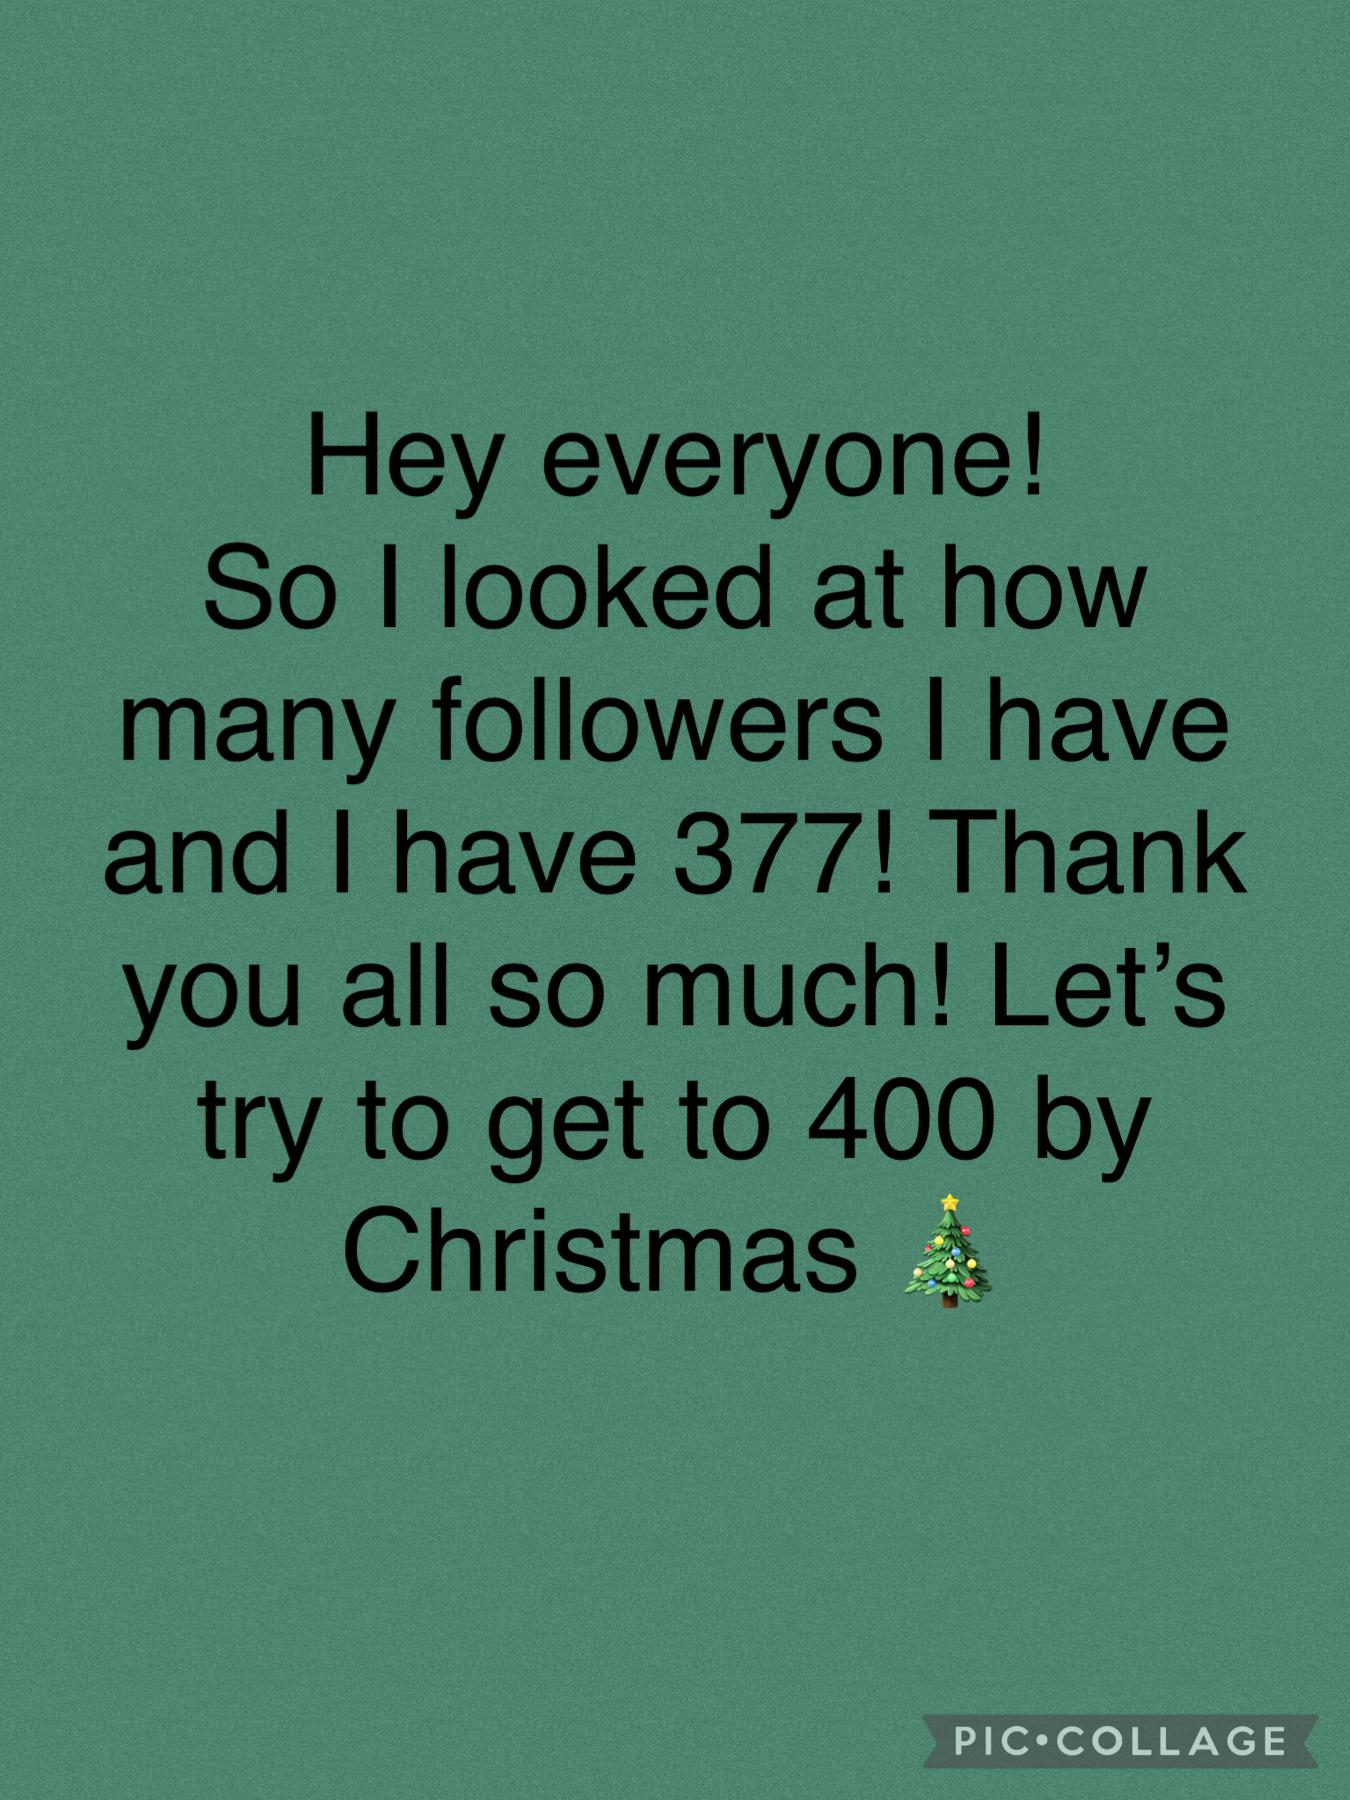 Let’s get to 400 by Christmas 🎄 